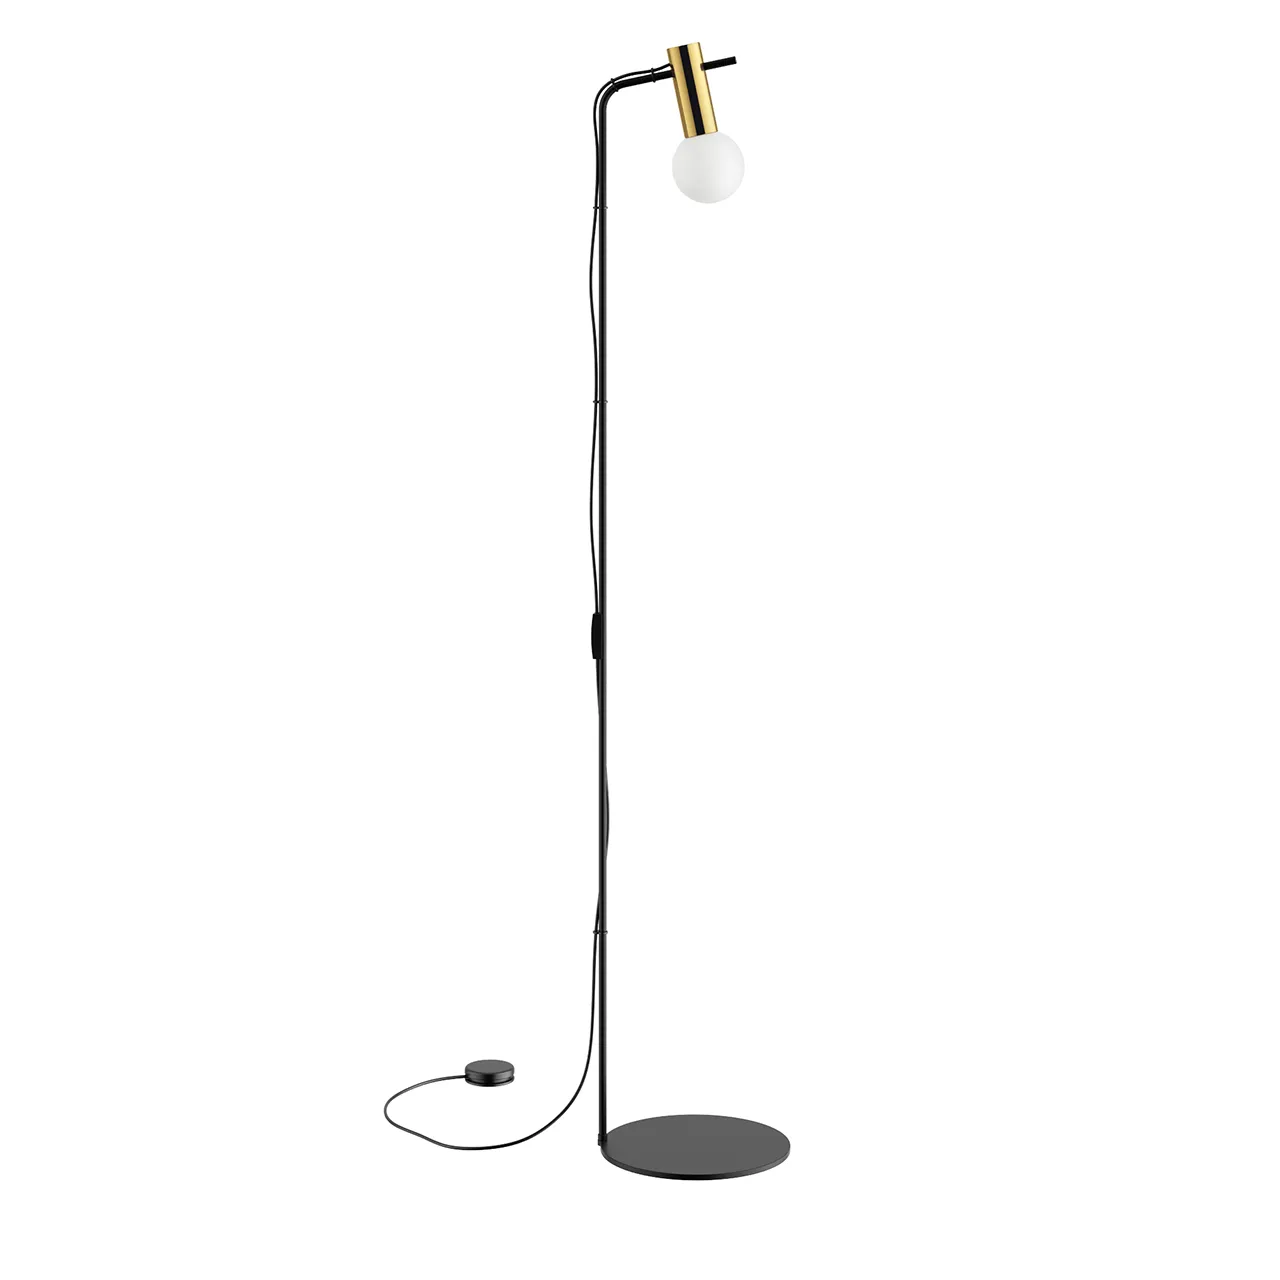 Lighting – nude-curved-floor-lamp-by-leds-c4